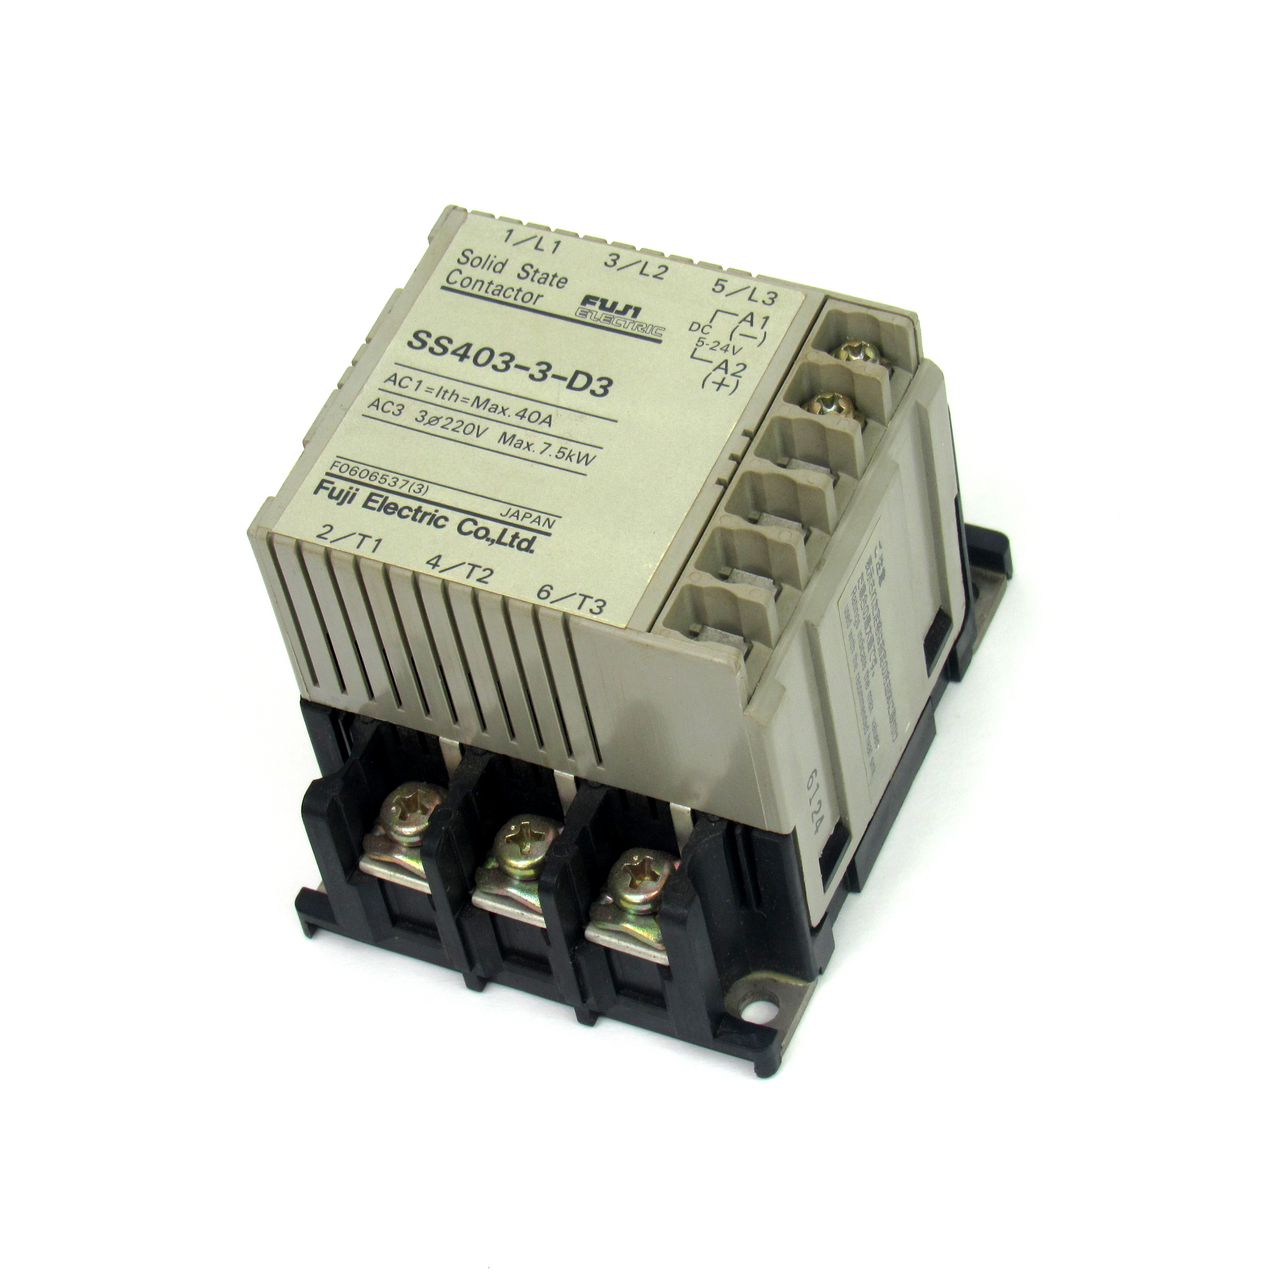 Fuji Electric SS403-3-D3 Solid State Contactor